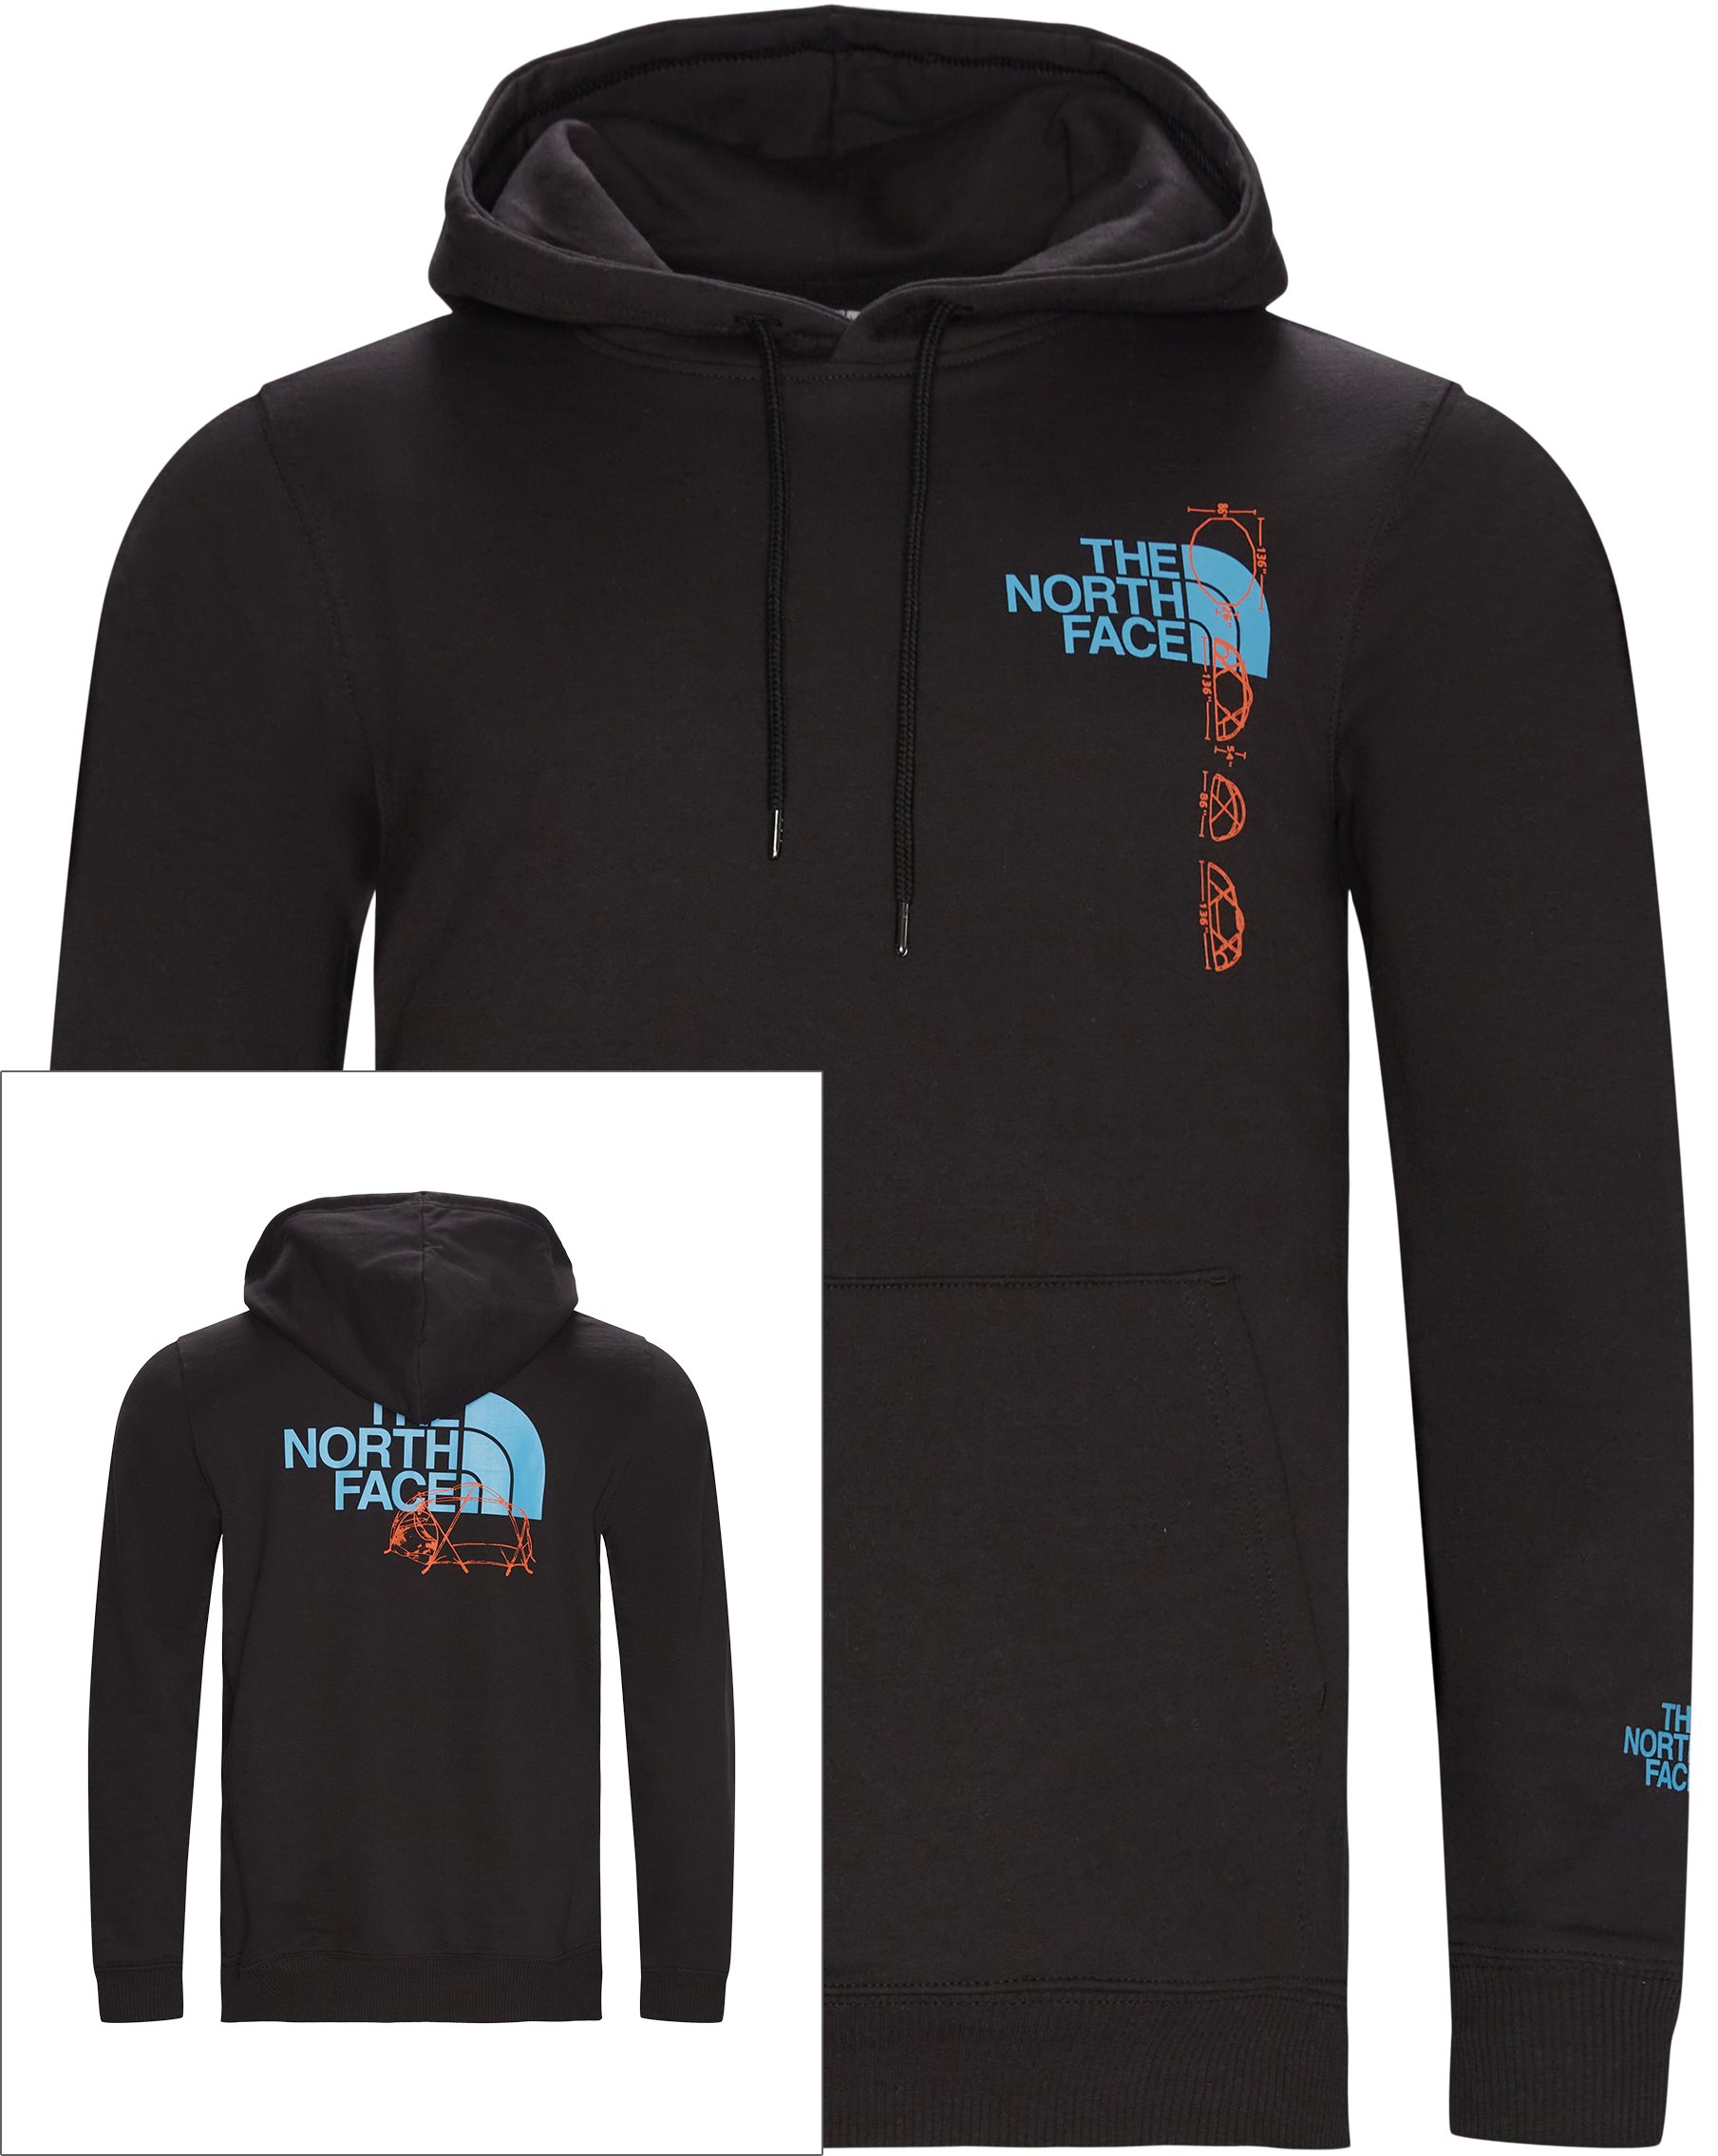 The North Face Sweatshirts RECYC EXPED HDY Svart